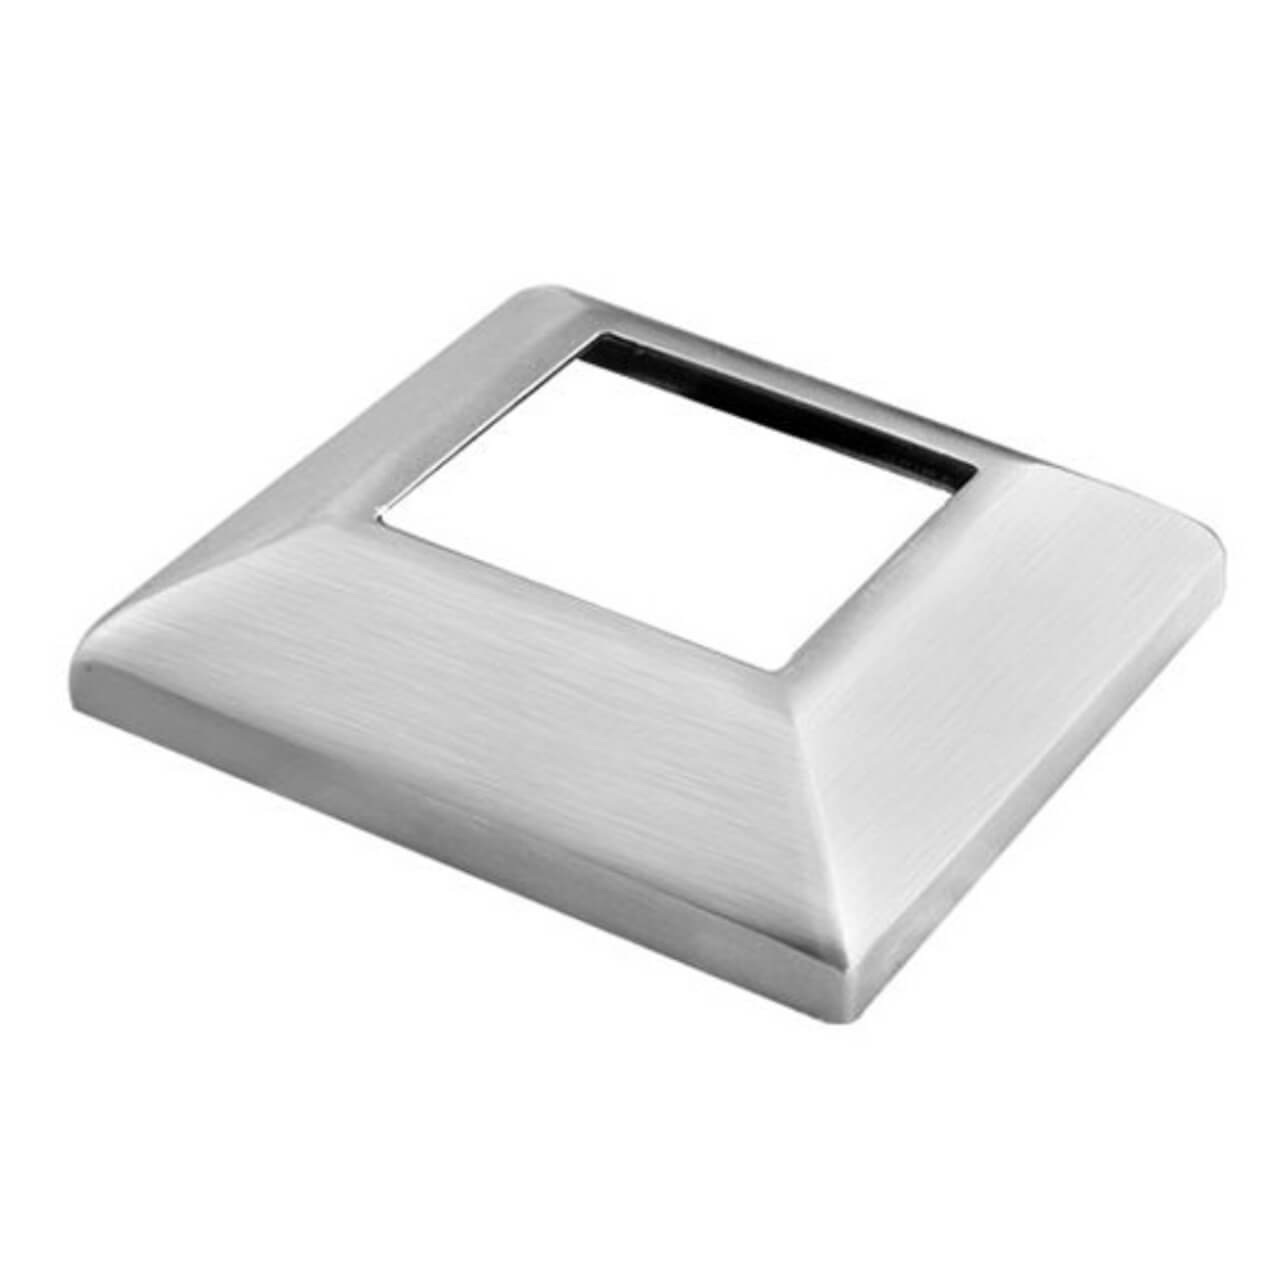 Railing Handrail Accessories Square Tubes Stainless Steel Decoration Base Cover Flange Cover